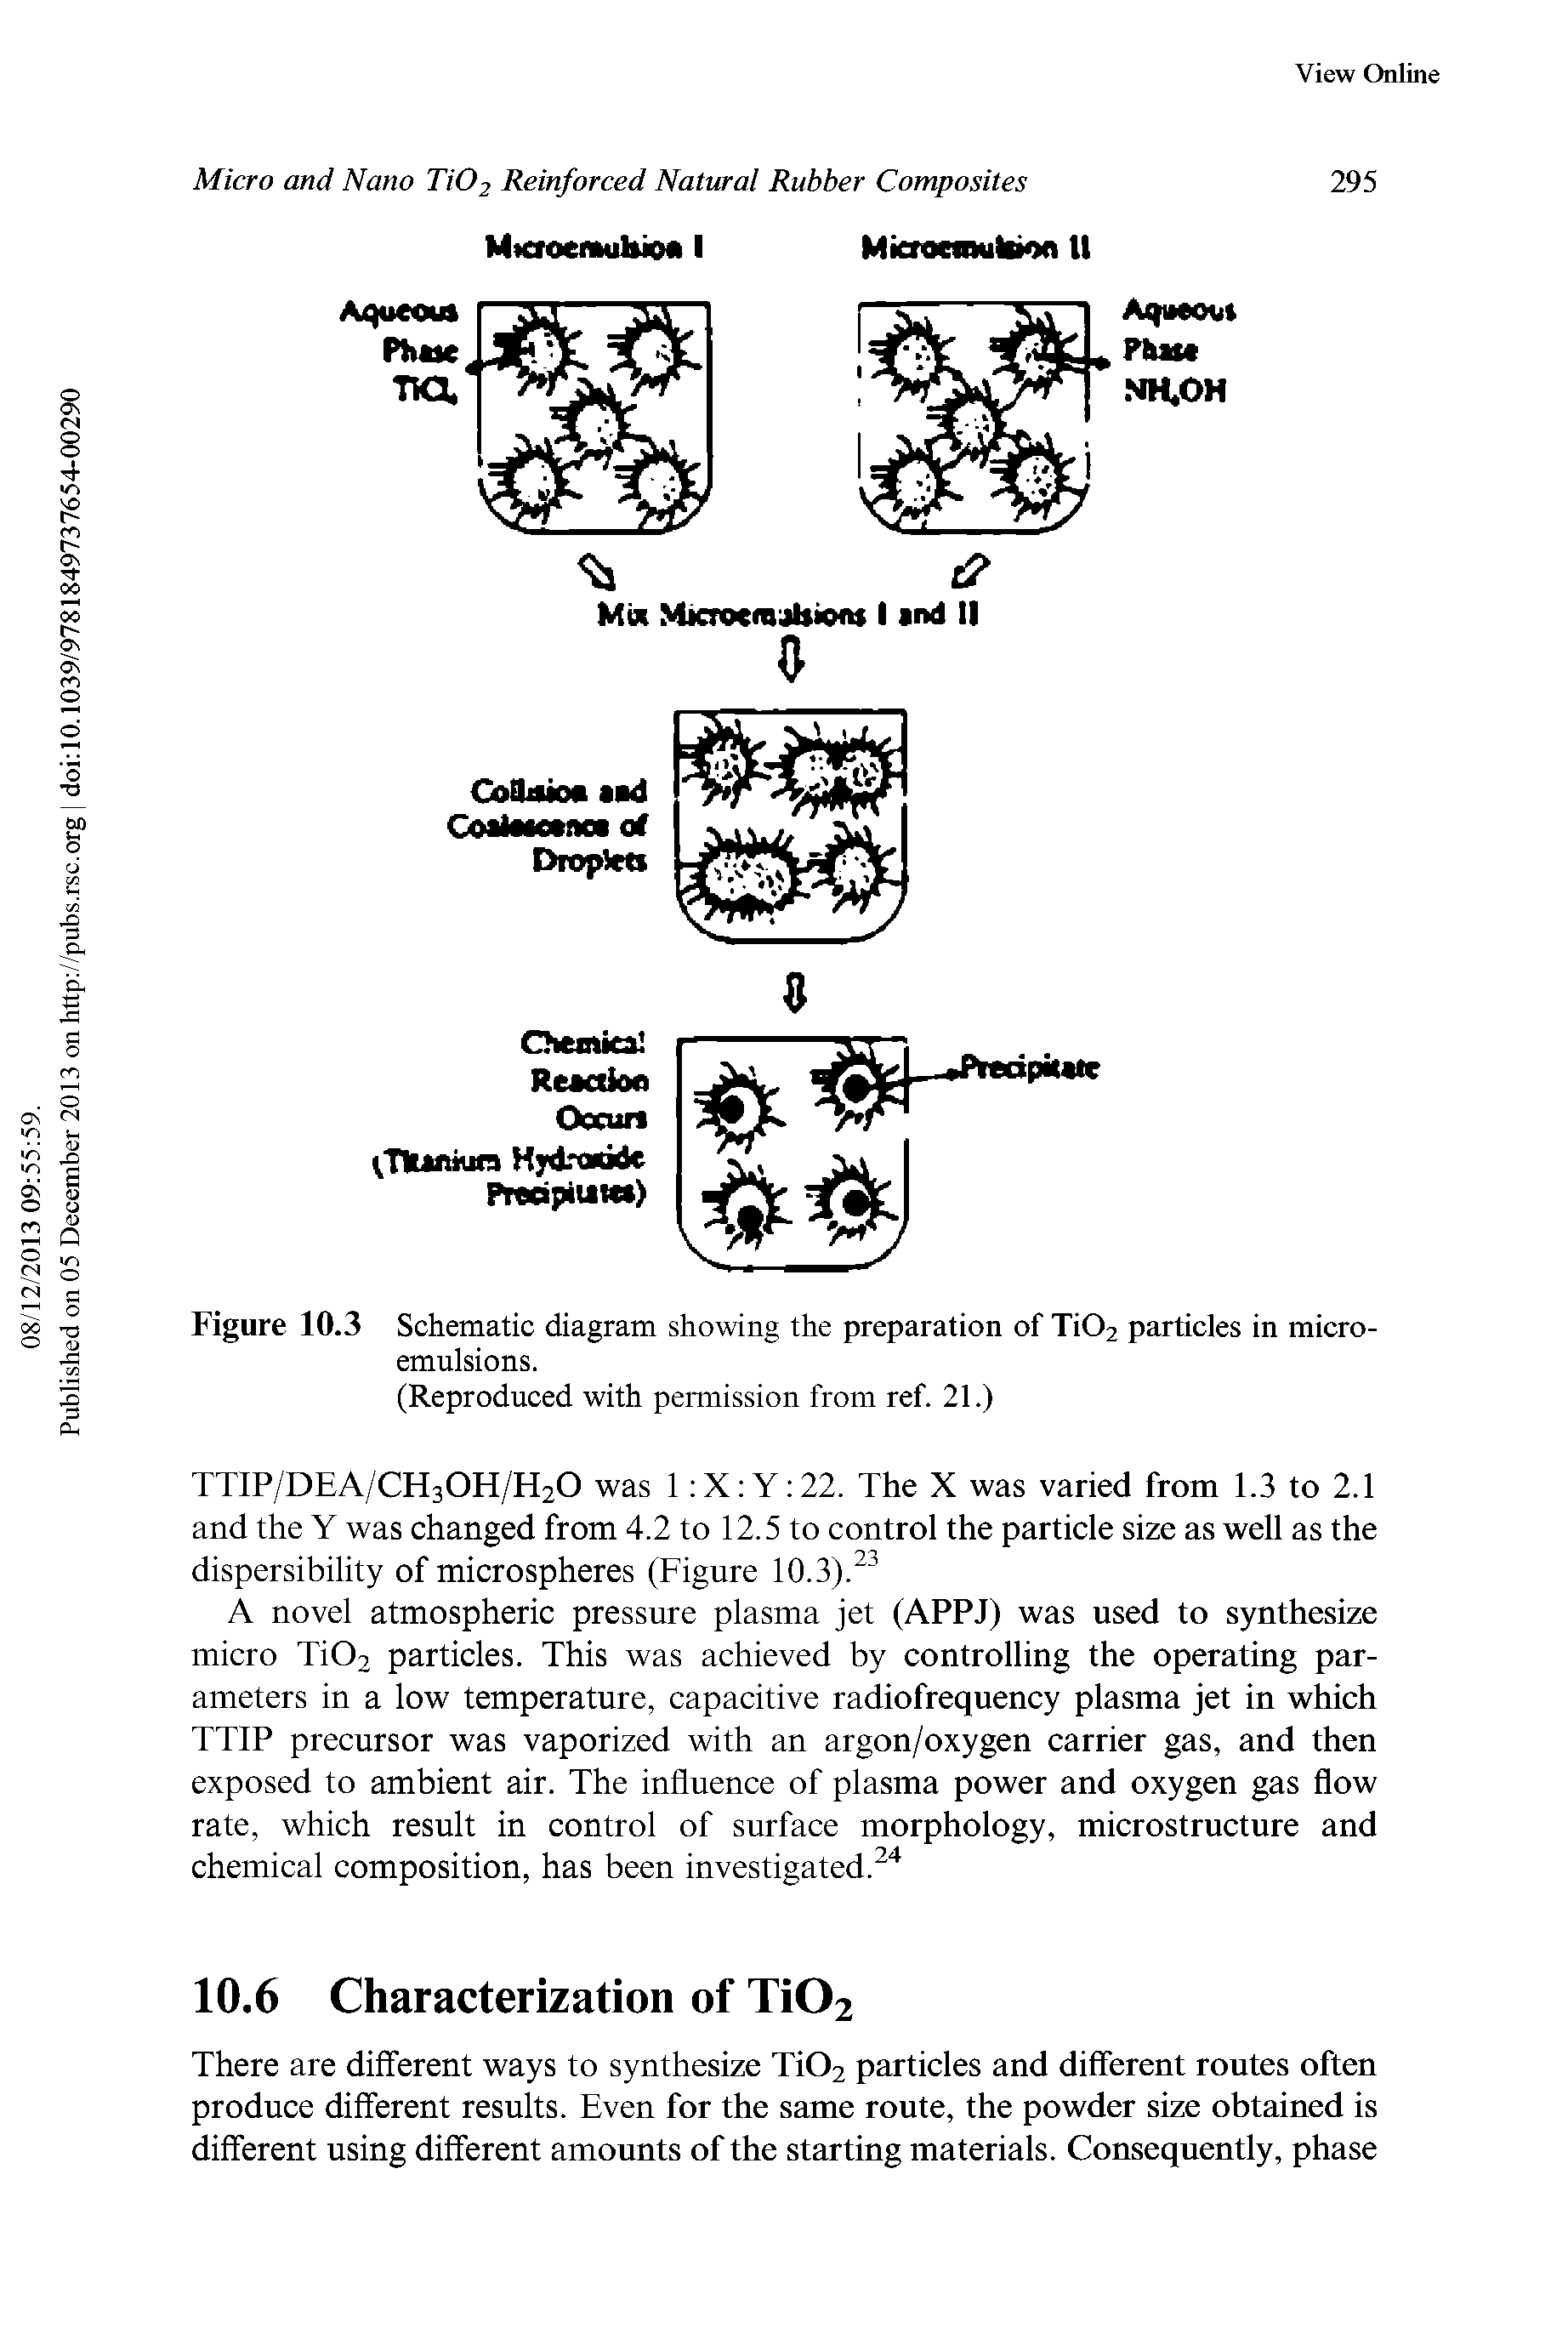 Figure 10.3 Schematic diagram showing the preparation of Ti02 particles in microemulsions.